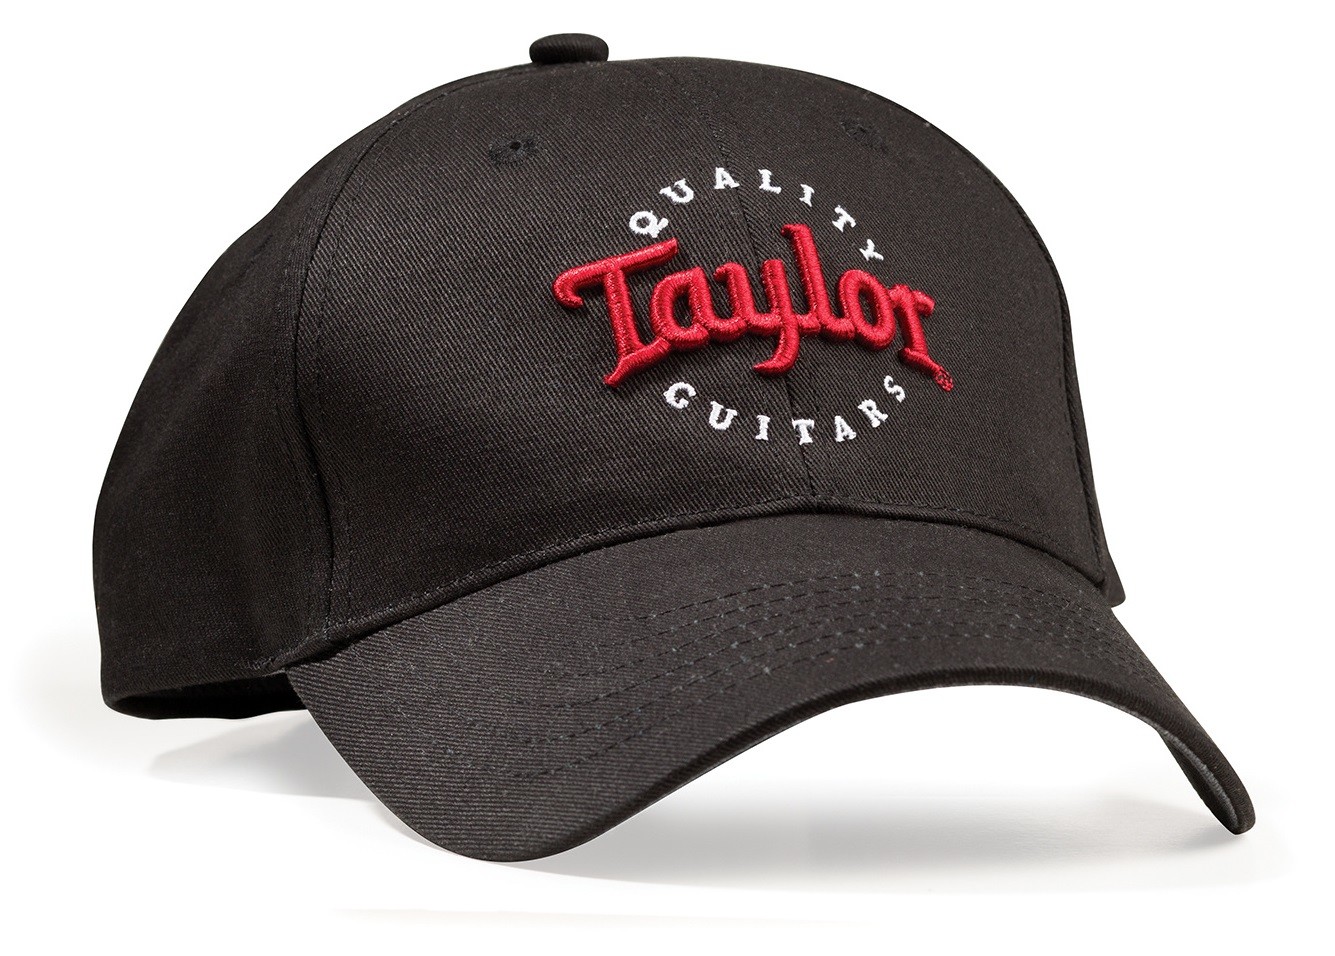 Taylor Black Cap, Red/Wht Emb- One Size